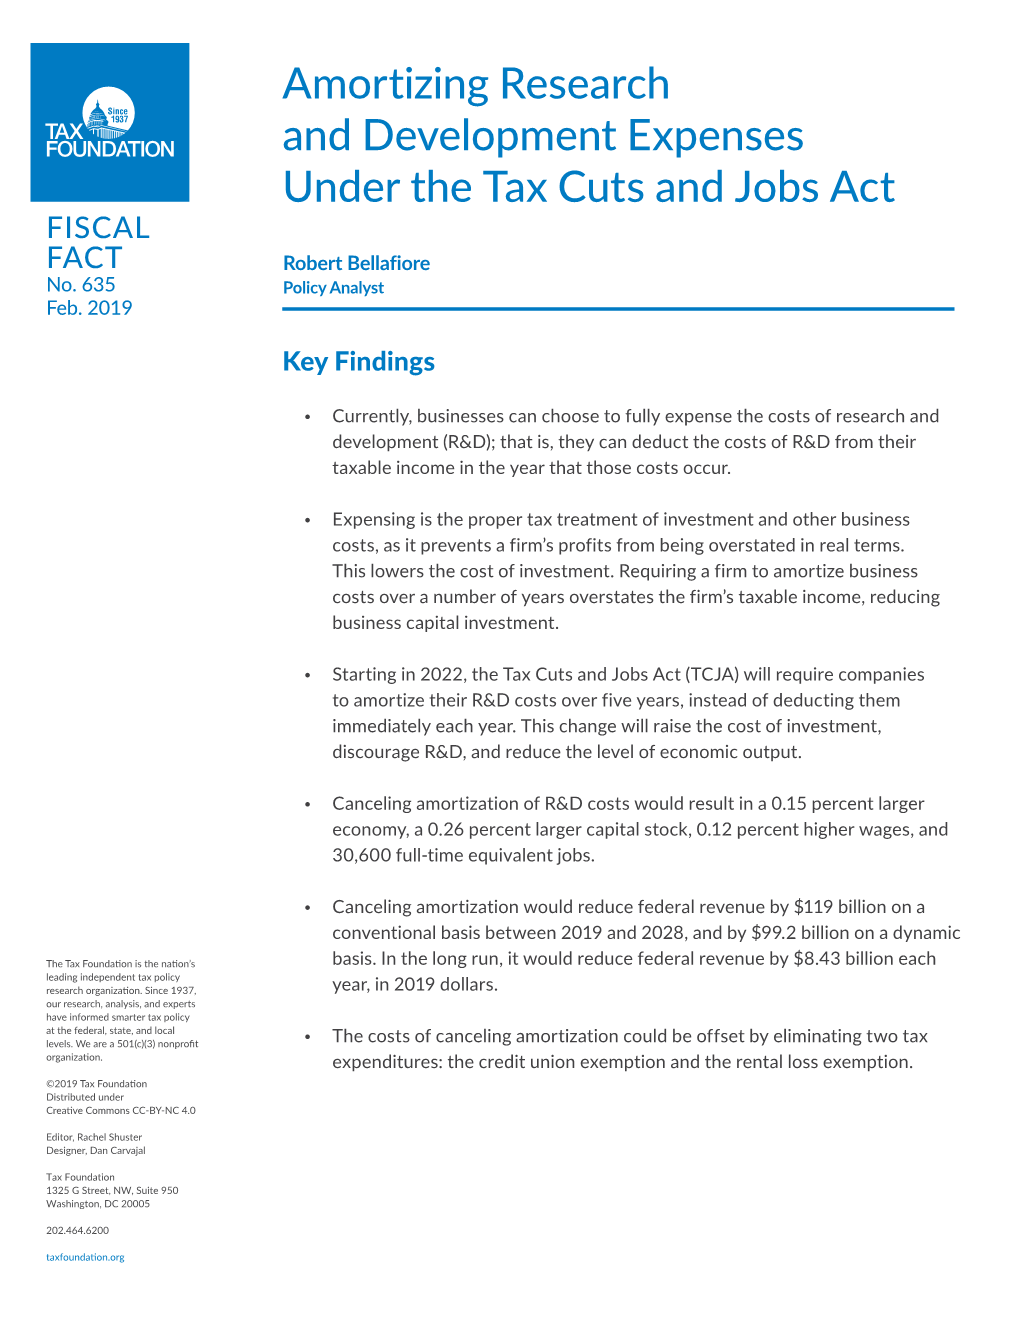 Amortizing Research and Development Expenses Under the Tax Cuts and Jobs Act FISCAL FACT Robert Bellafiore No